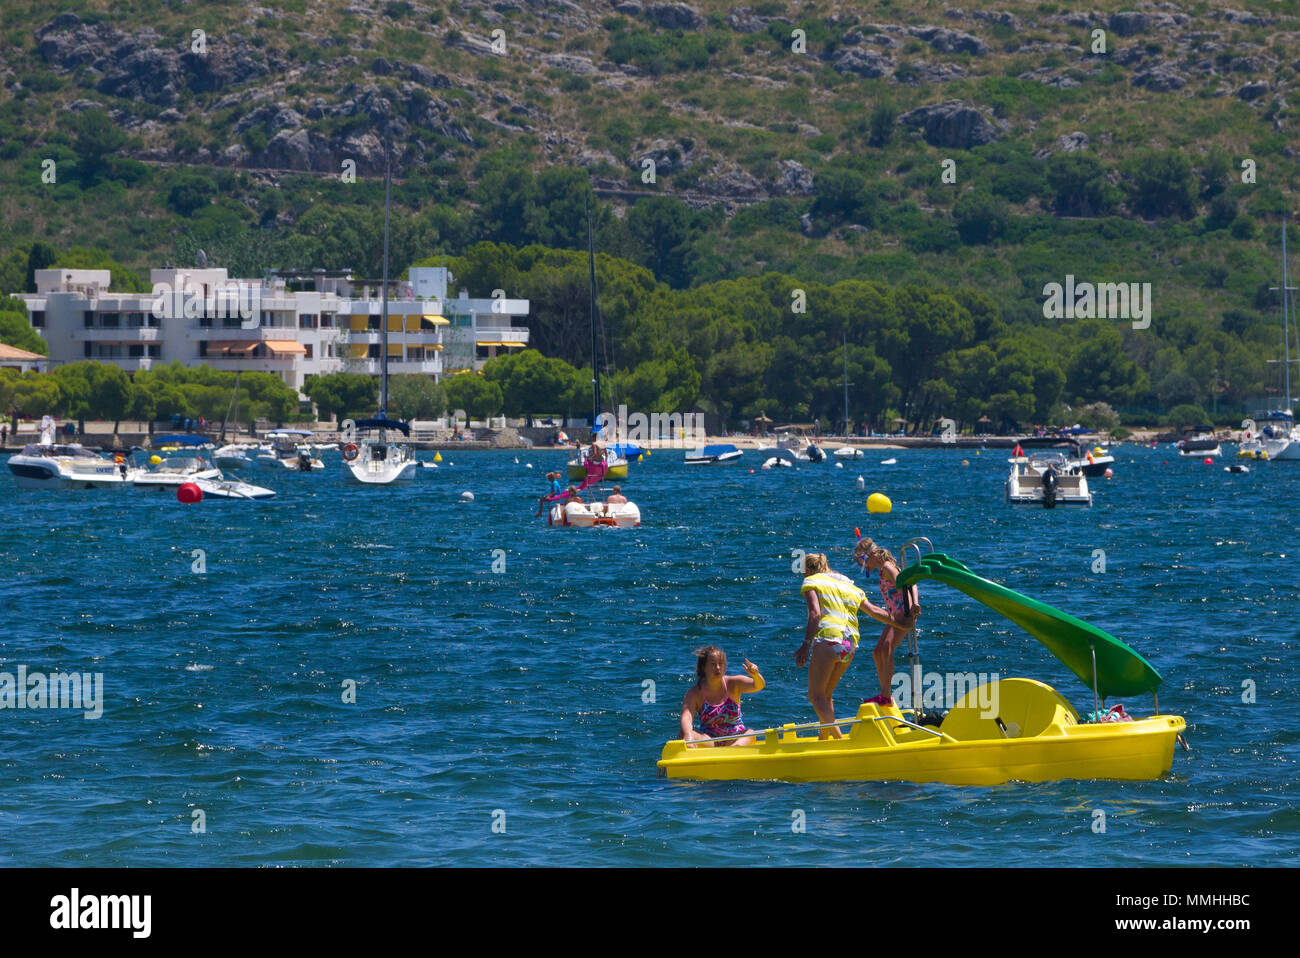 Children on a yellow pedalo in the waters of Port de Pollenca in Mallorca, Spain Stock Photo